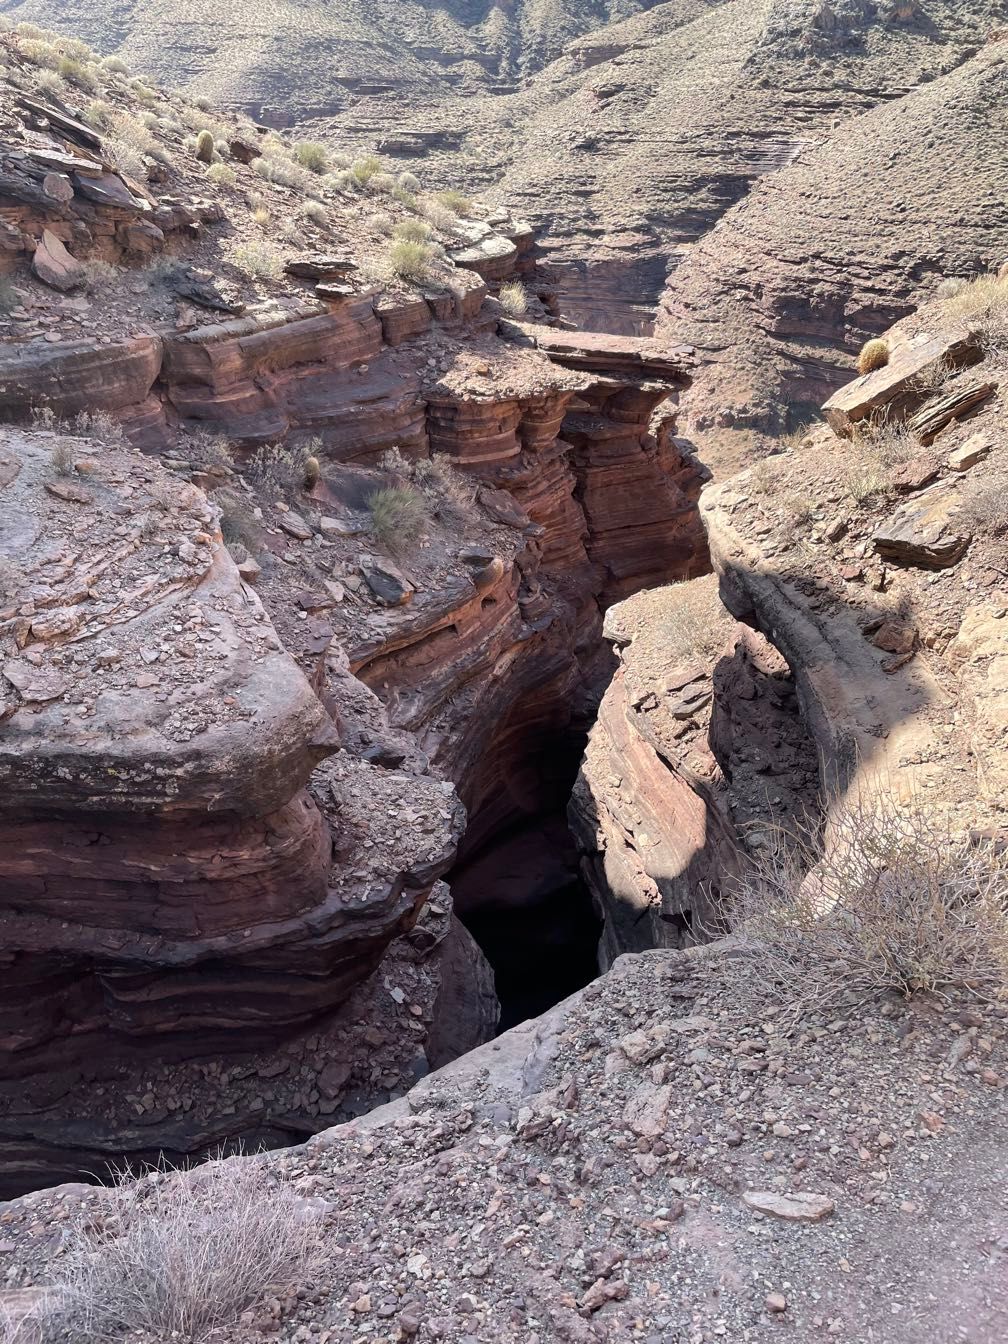 The Deer Creek slot canyon from above